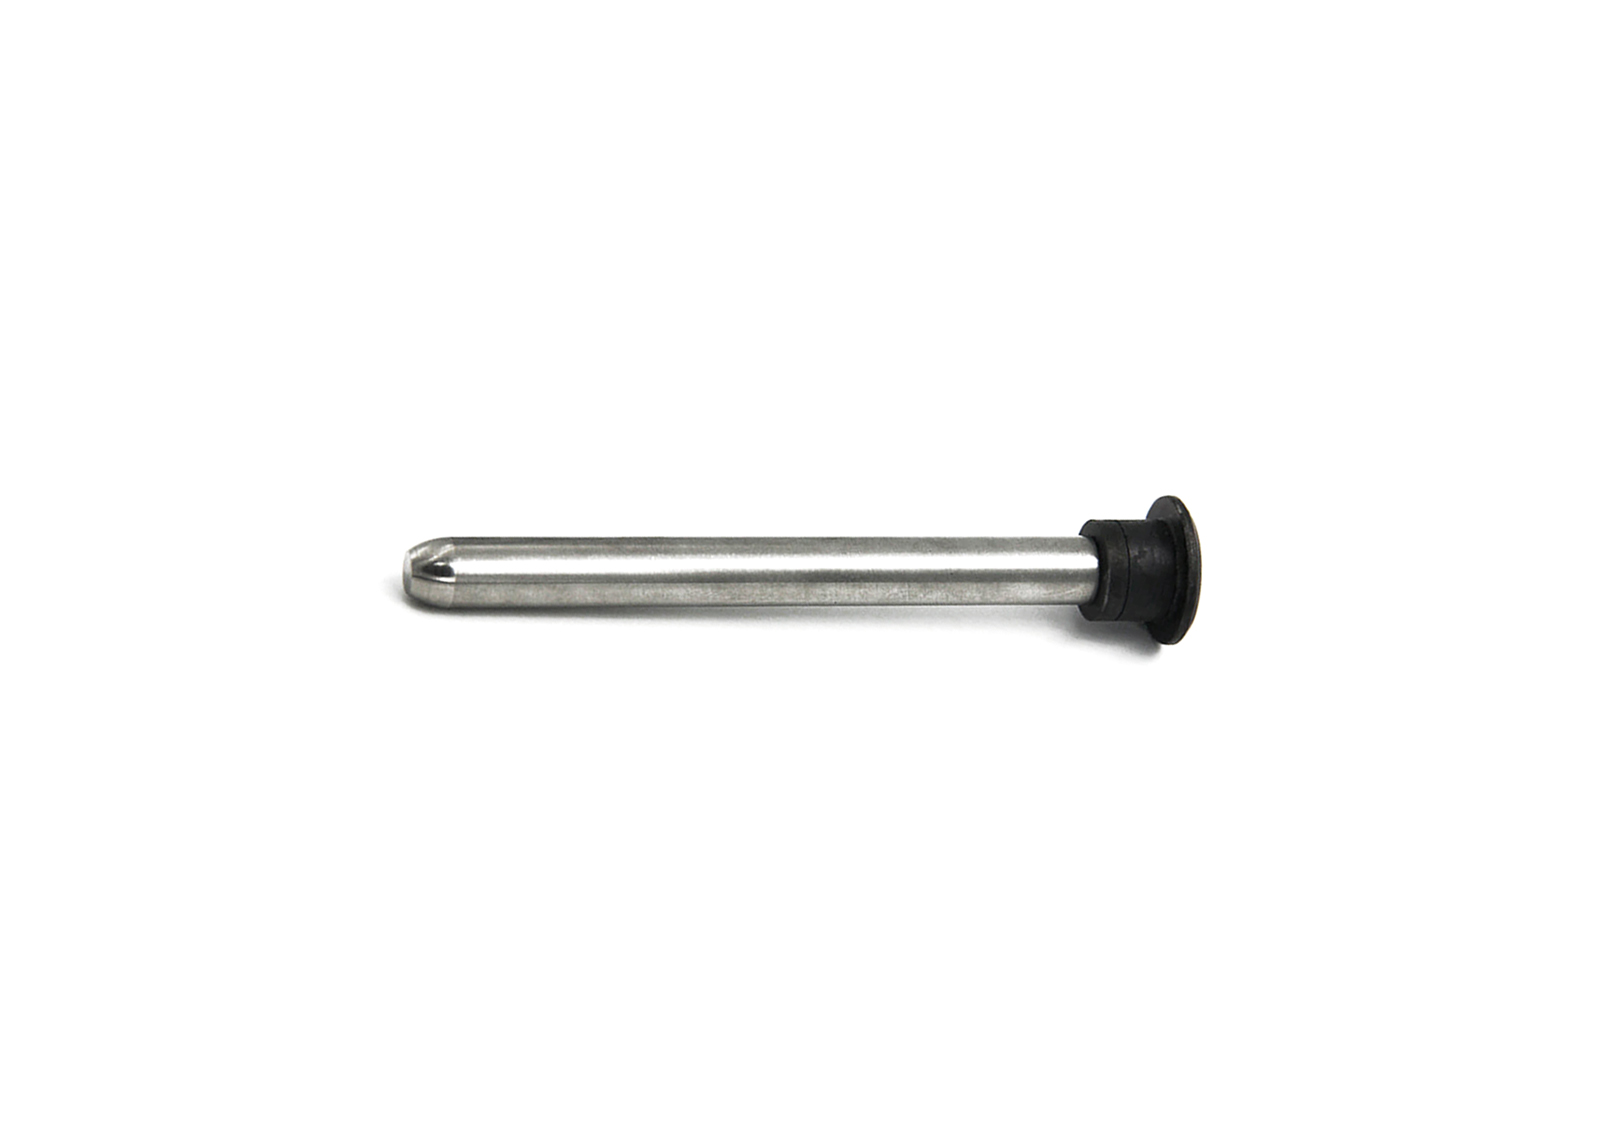 Stainless Spring Guide w/ rotary ring for MOD24/APS-2 Series (9mm) -Modify Bolt Action Rifle Parts